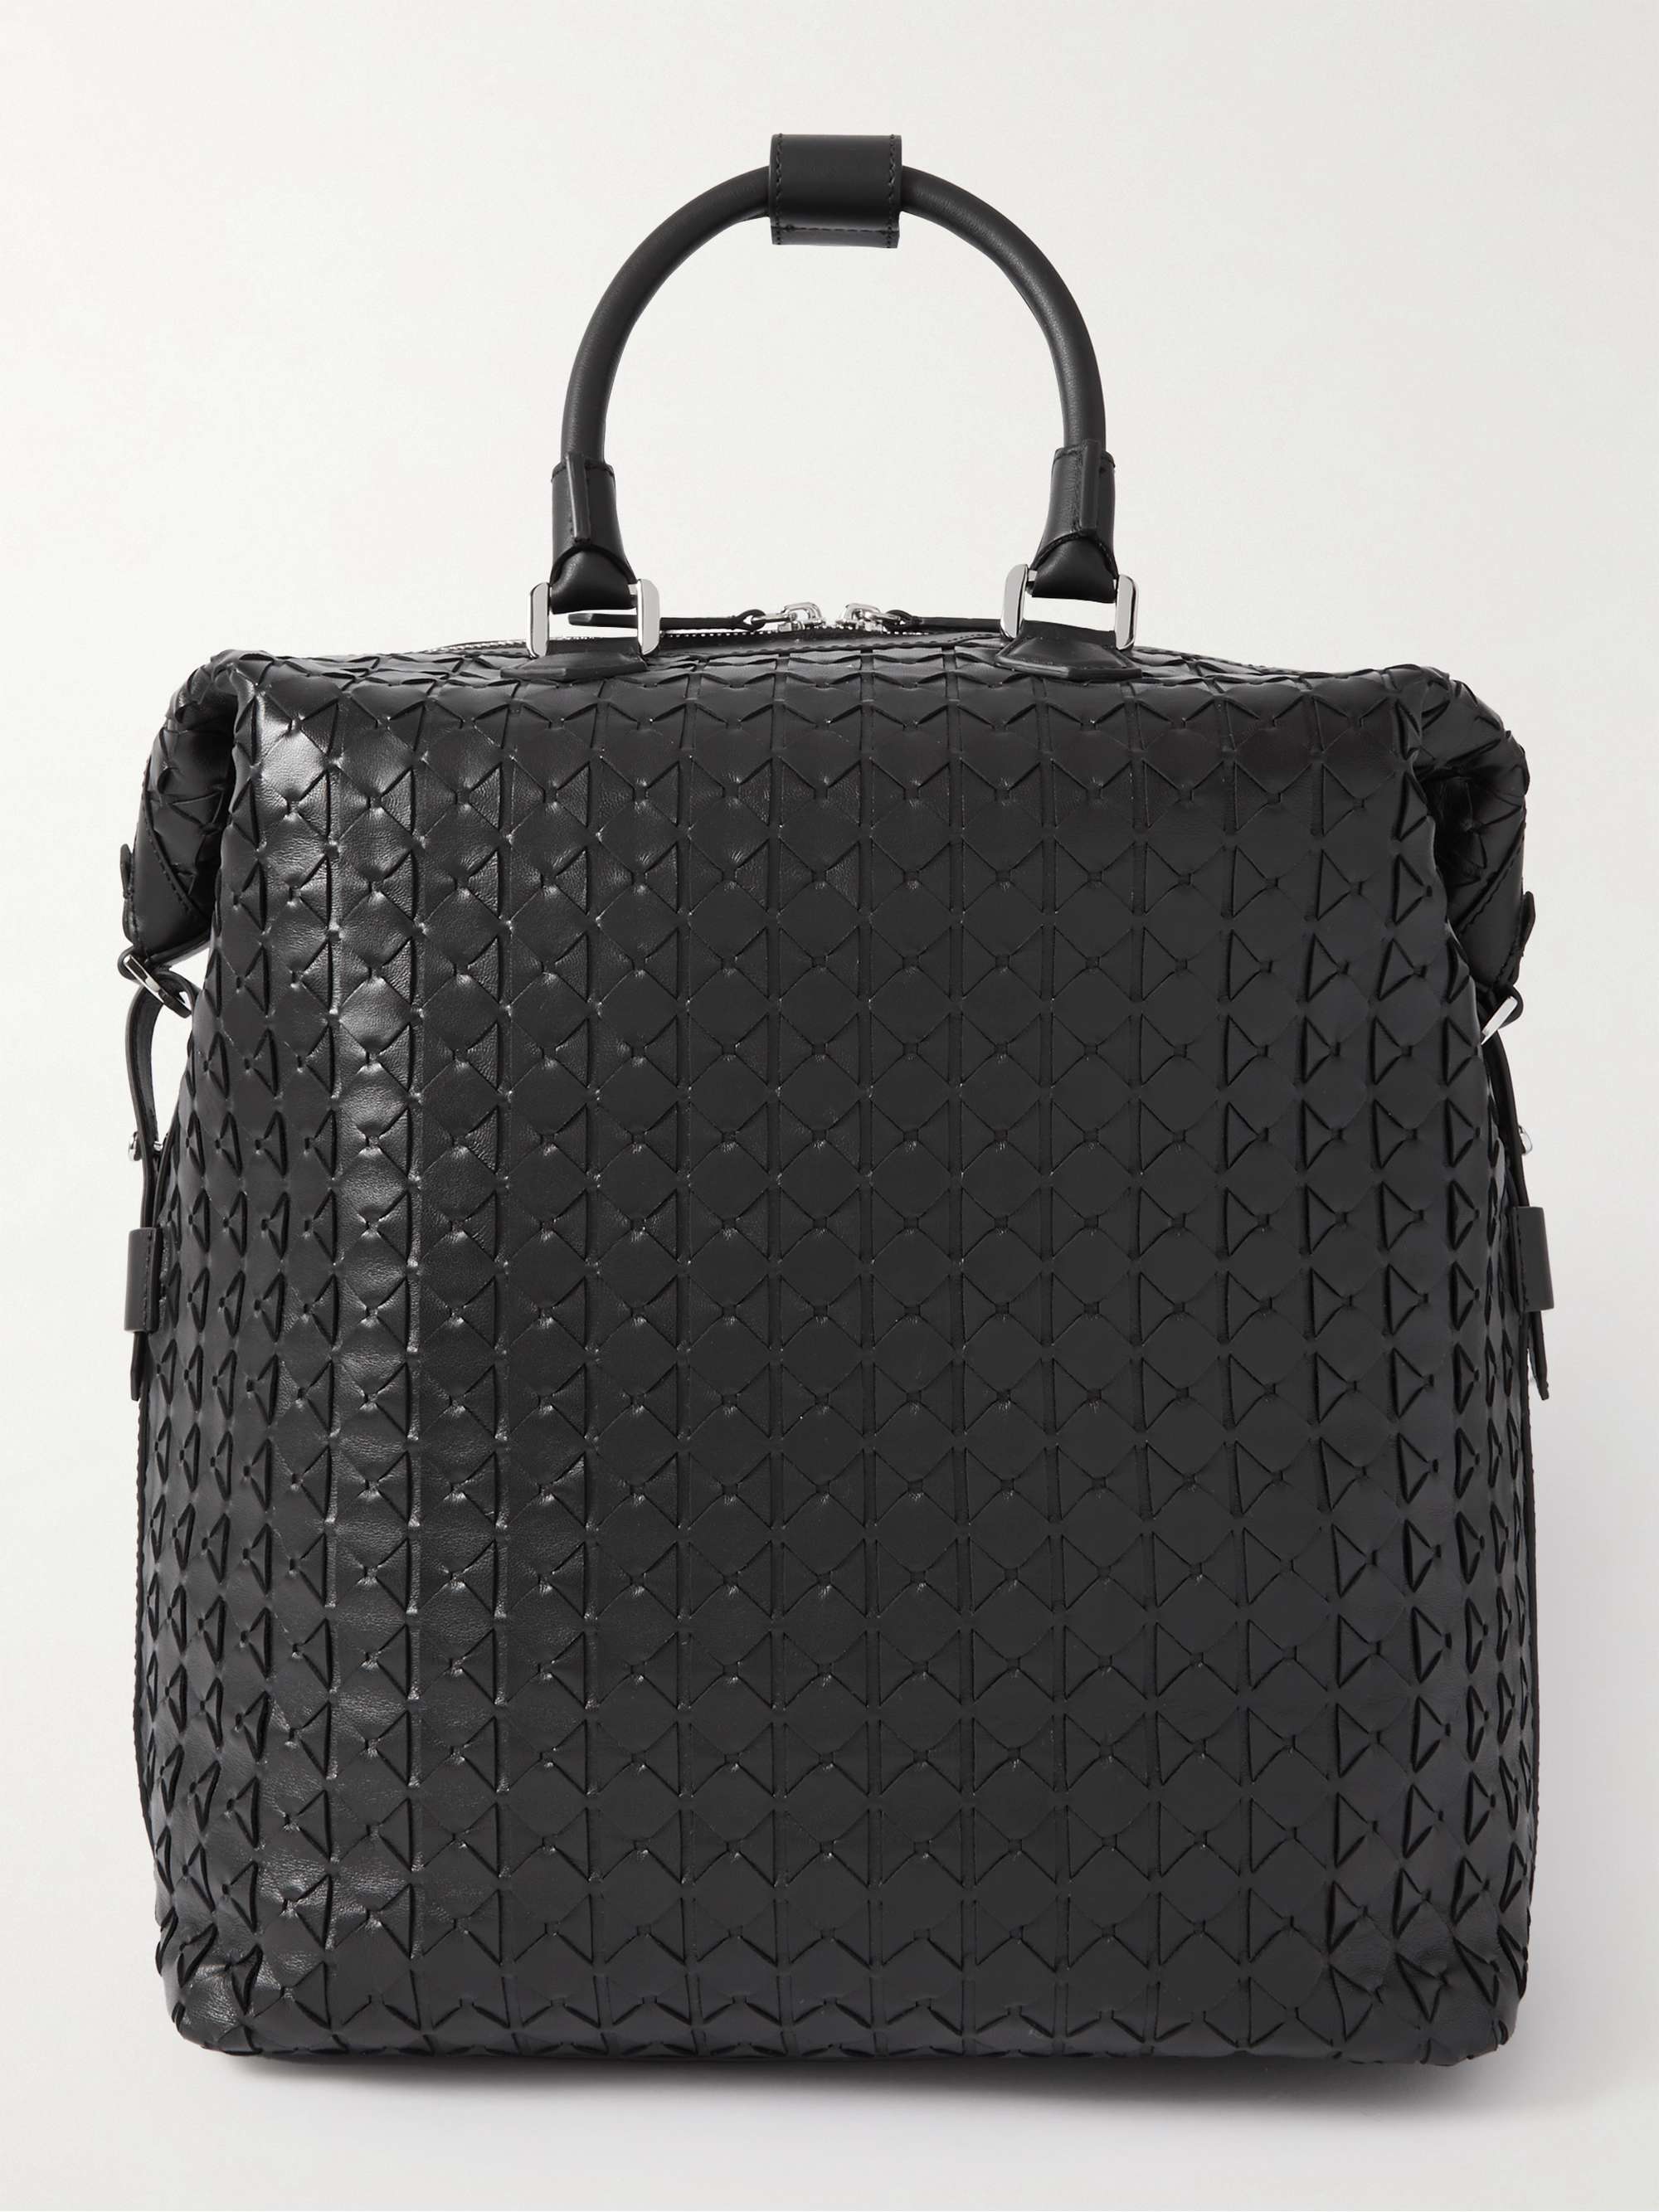 SERAPIAN Woven Leather Backpack